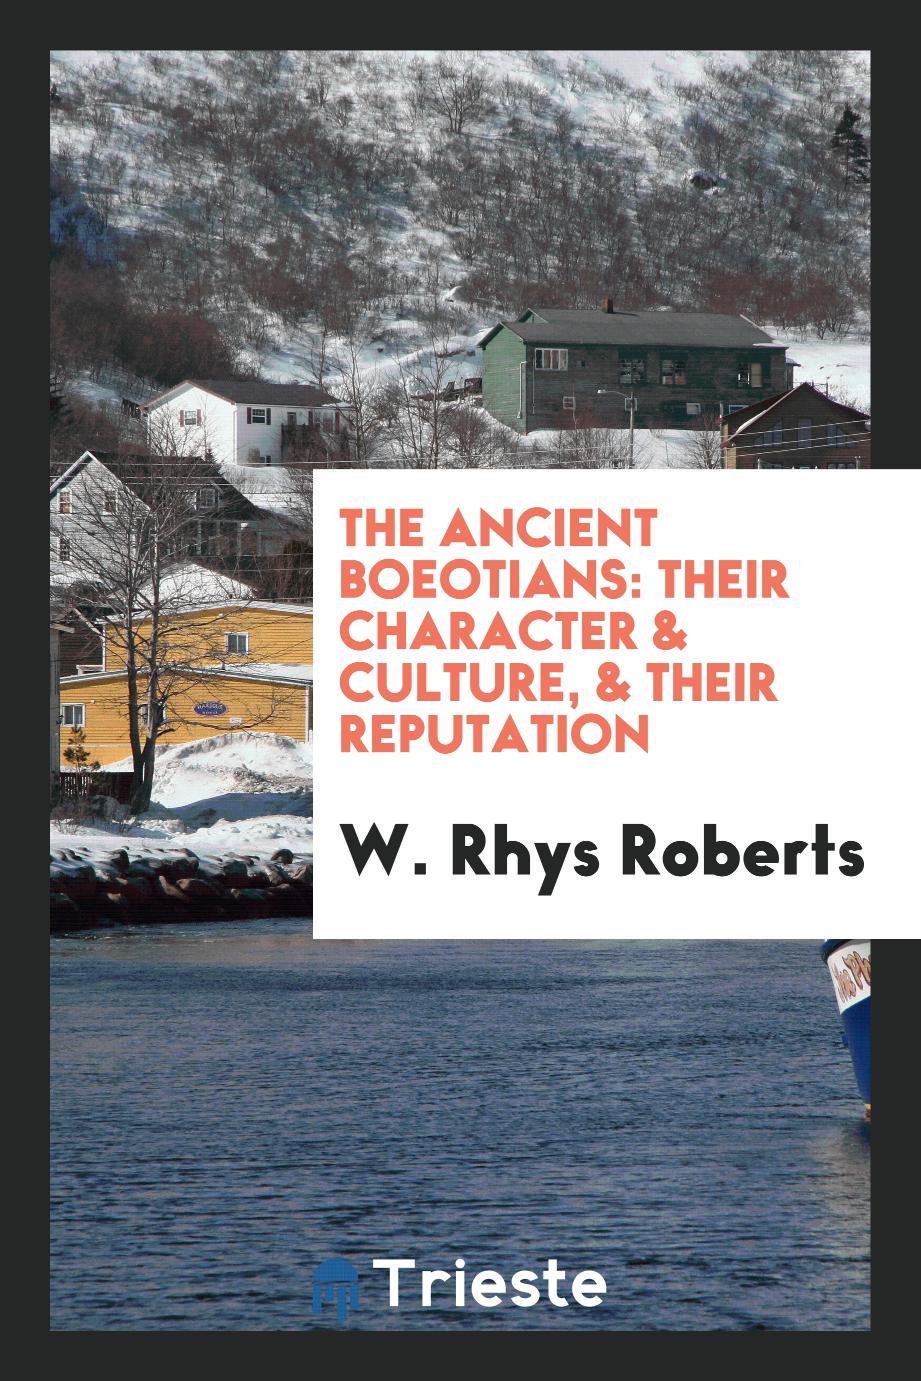 The Ancient Boeotians: Their Character & Culture, & Their Reputation